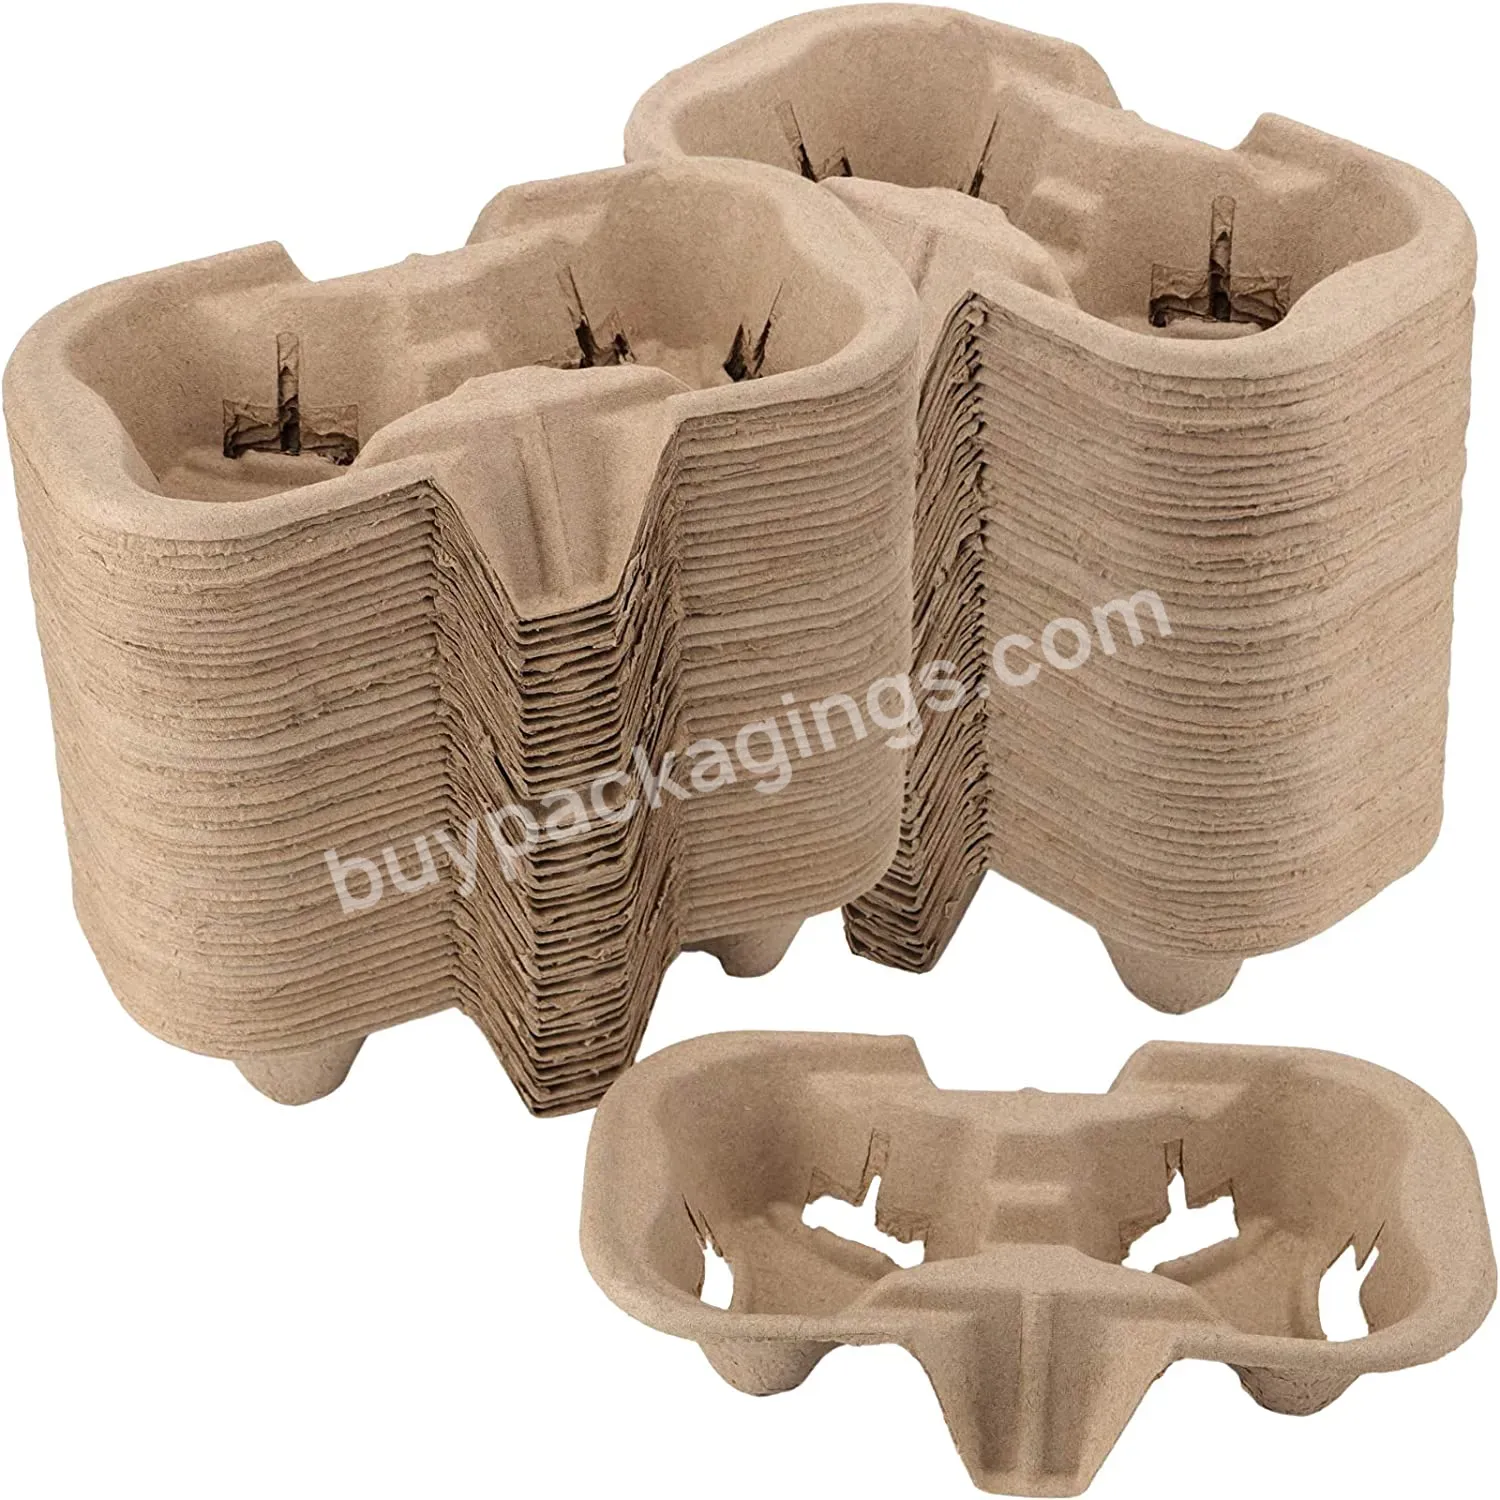 Drink Carrier,Pulp Fiber Disposable Take-out Cup Carriers Holders For Coffee Cup Holder Tray Can Be Customized - Buy Cup Holders For Desks,Coffee Paper Trays,Coffee Cup Holder.